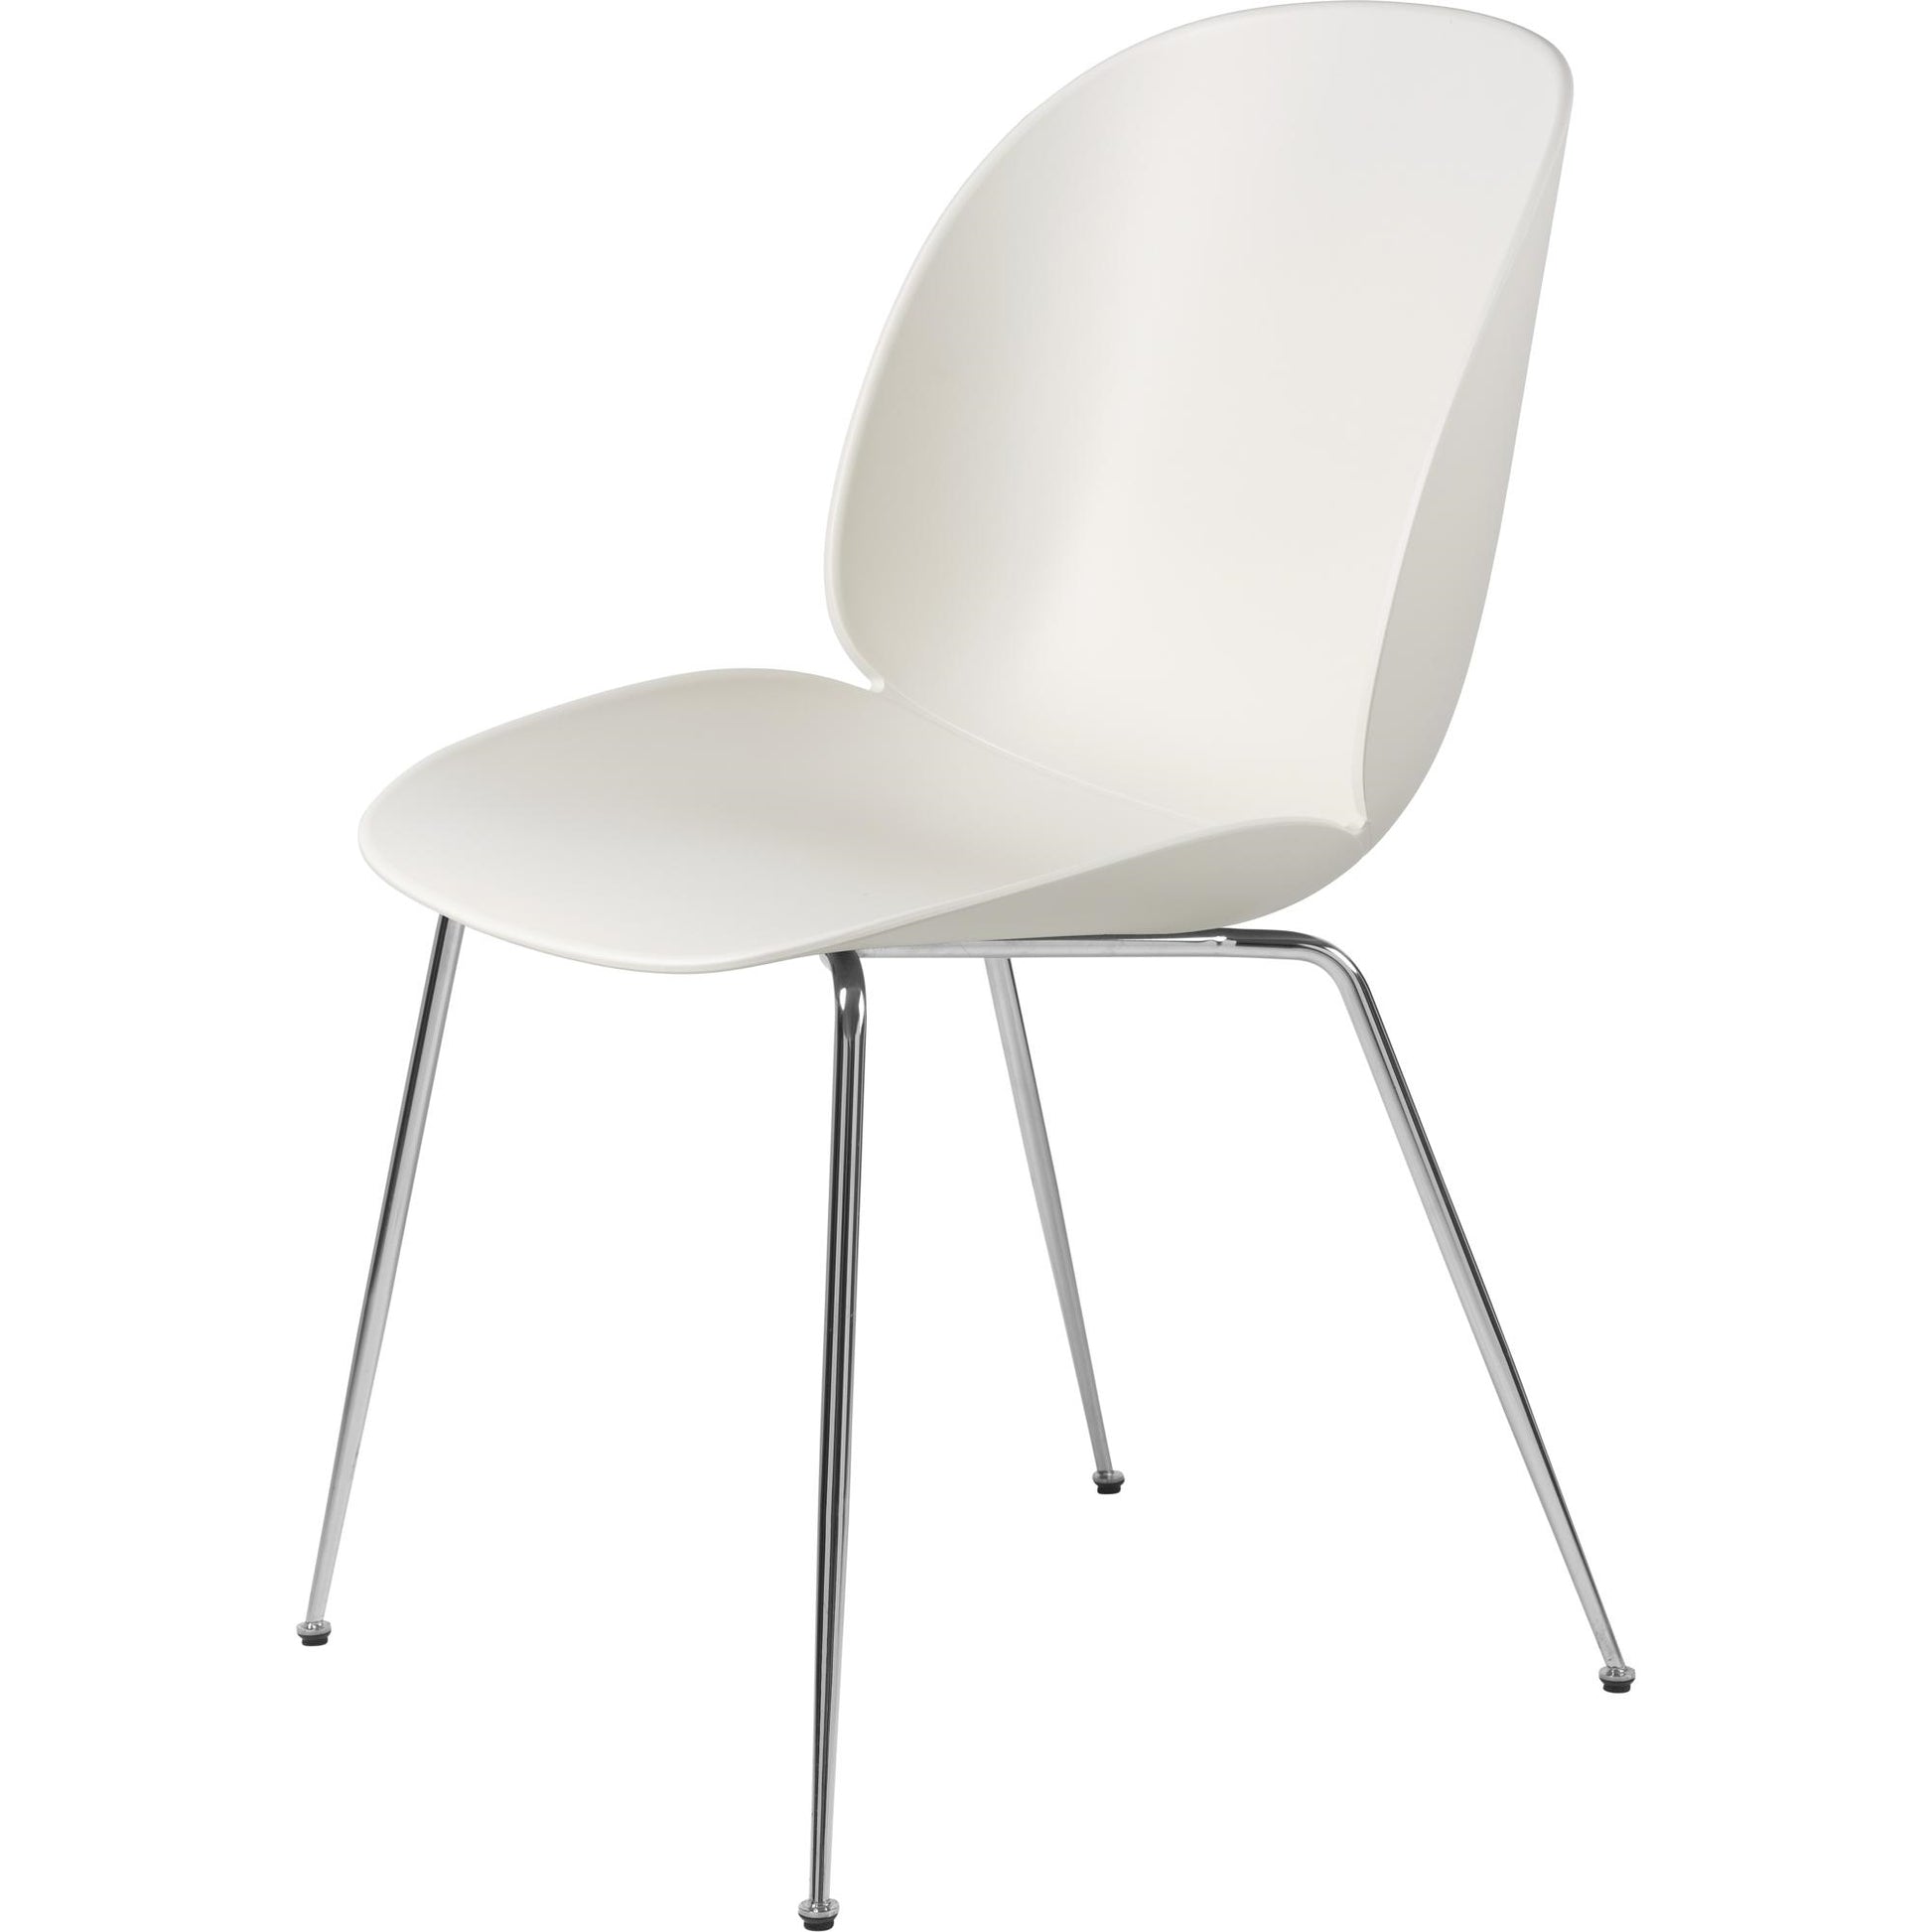 Beetle Dining Chair Conic Base Chrome by GUBI #Chrome/ Alabaster White